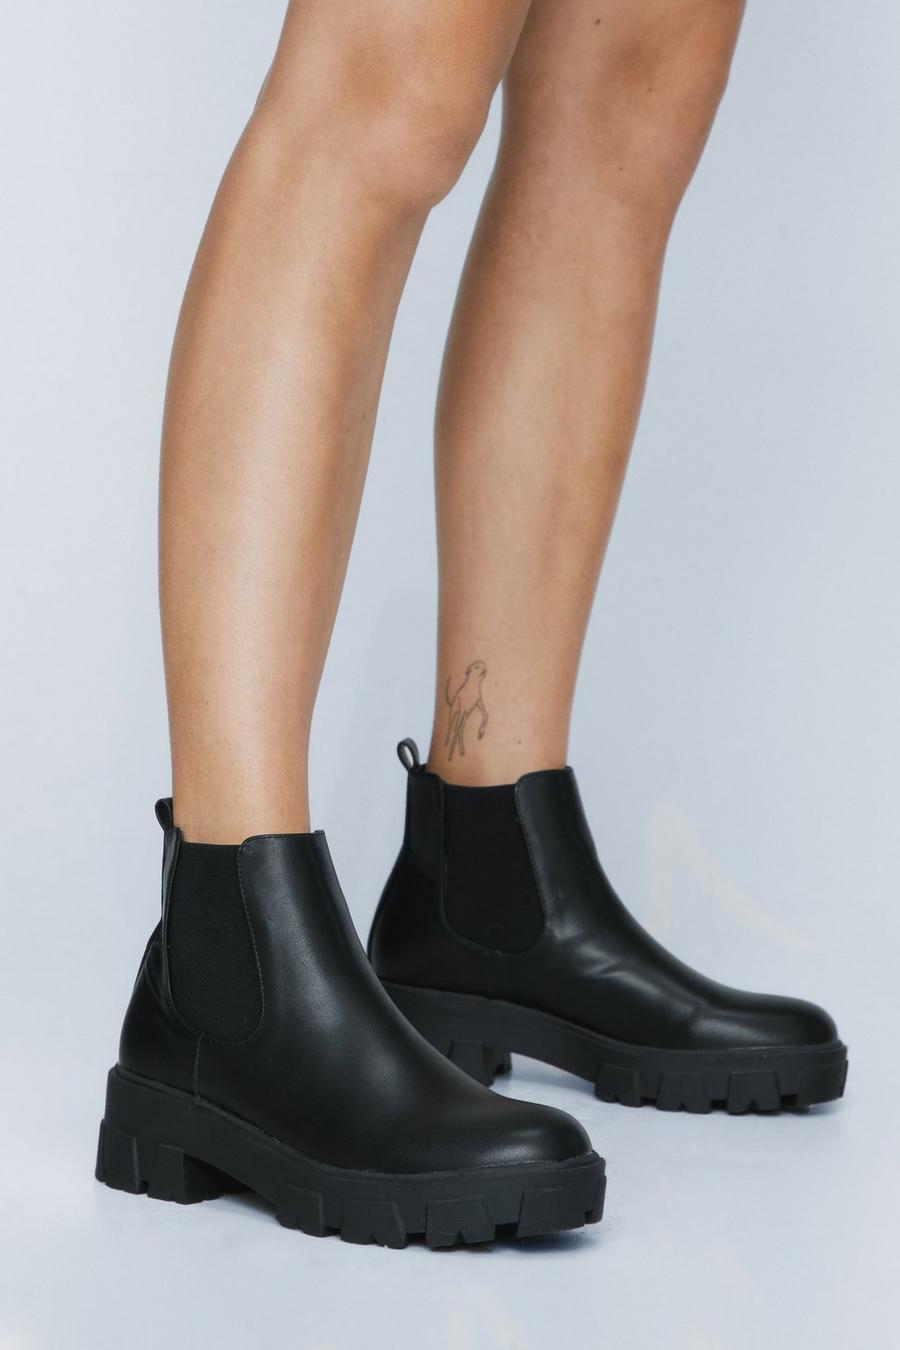 Step Up Your Game Cleated Chelsea Boots